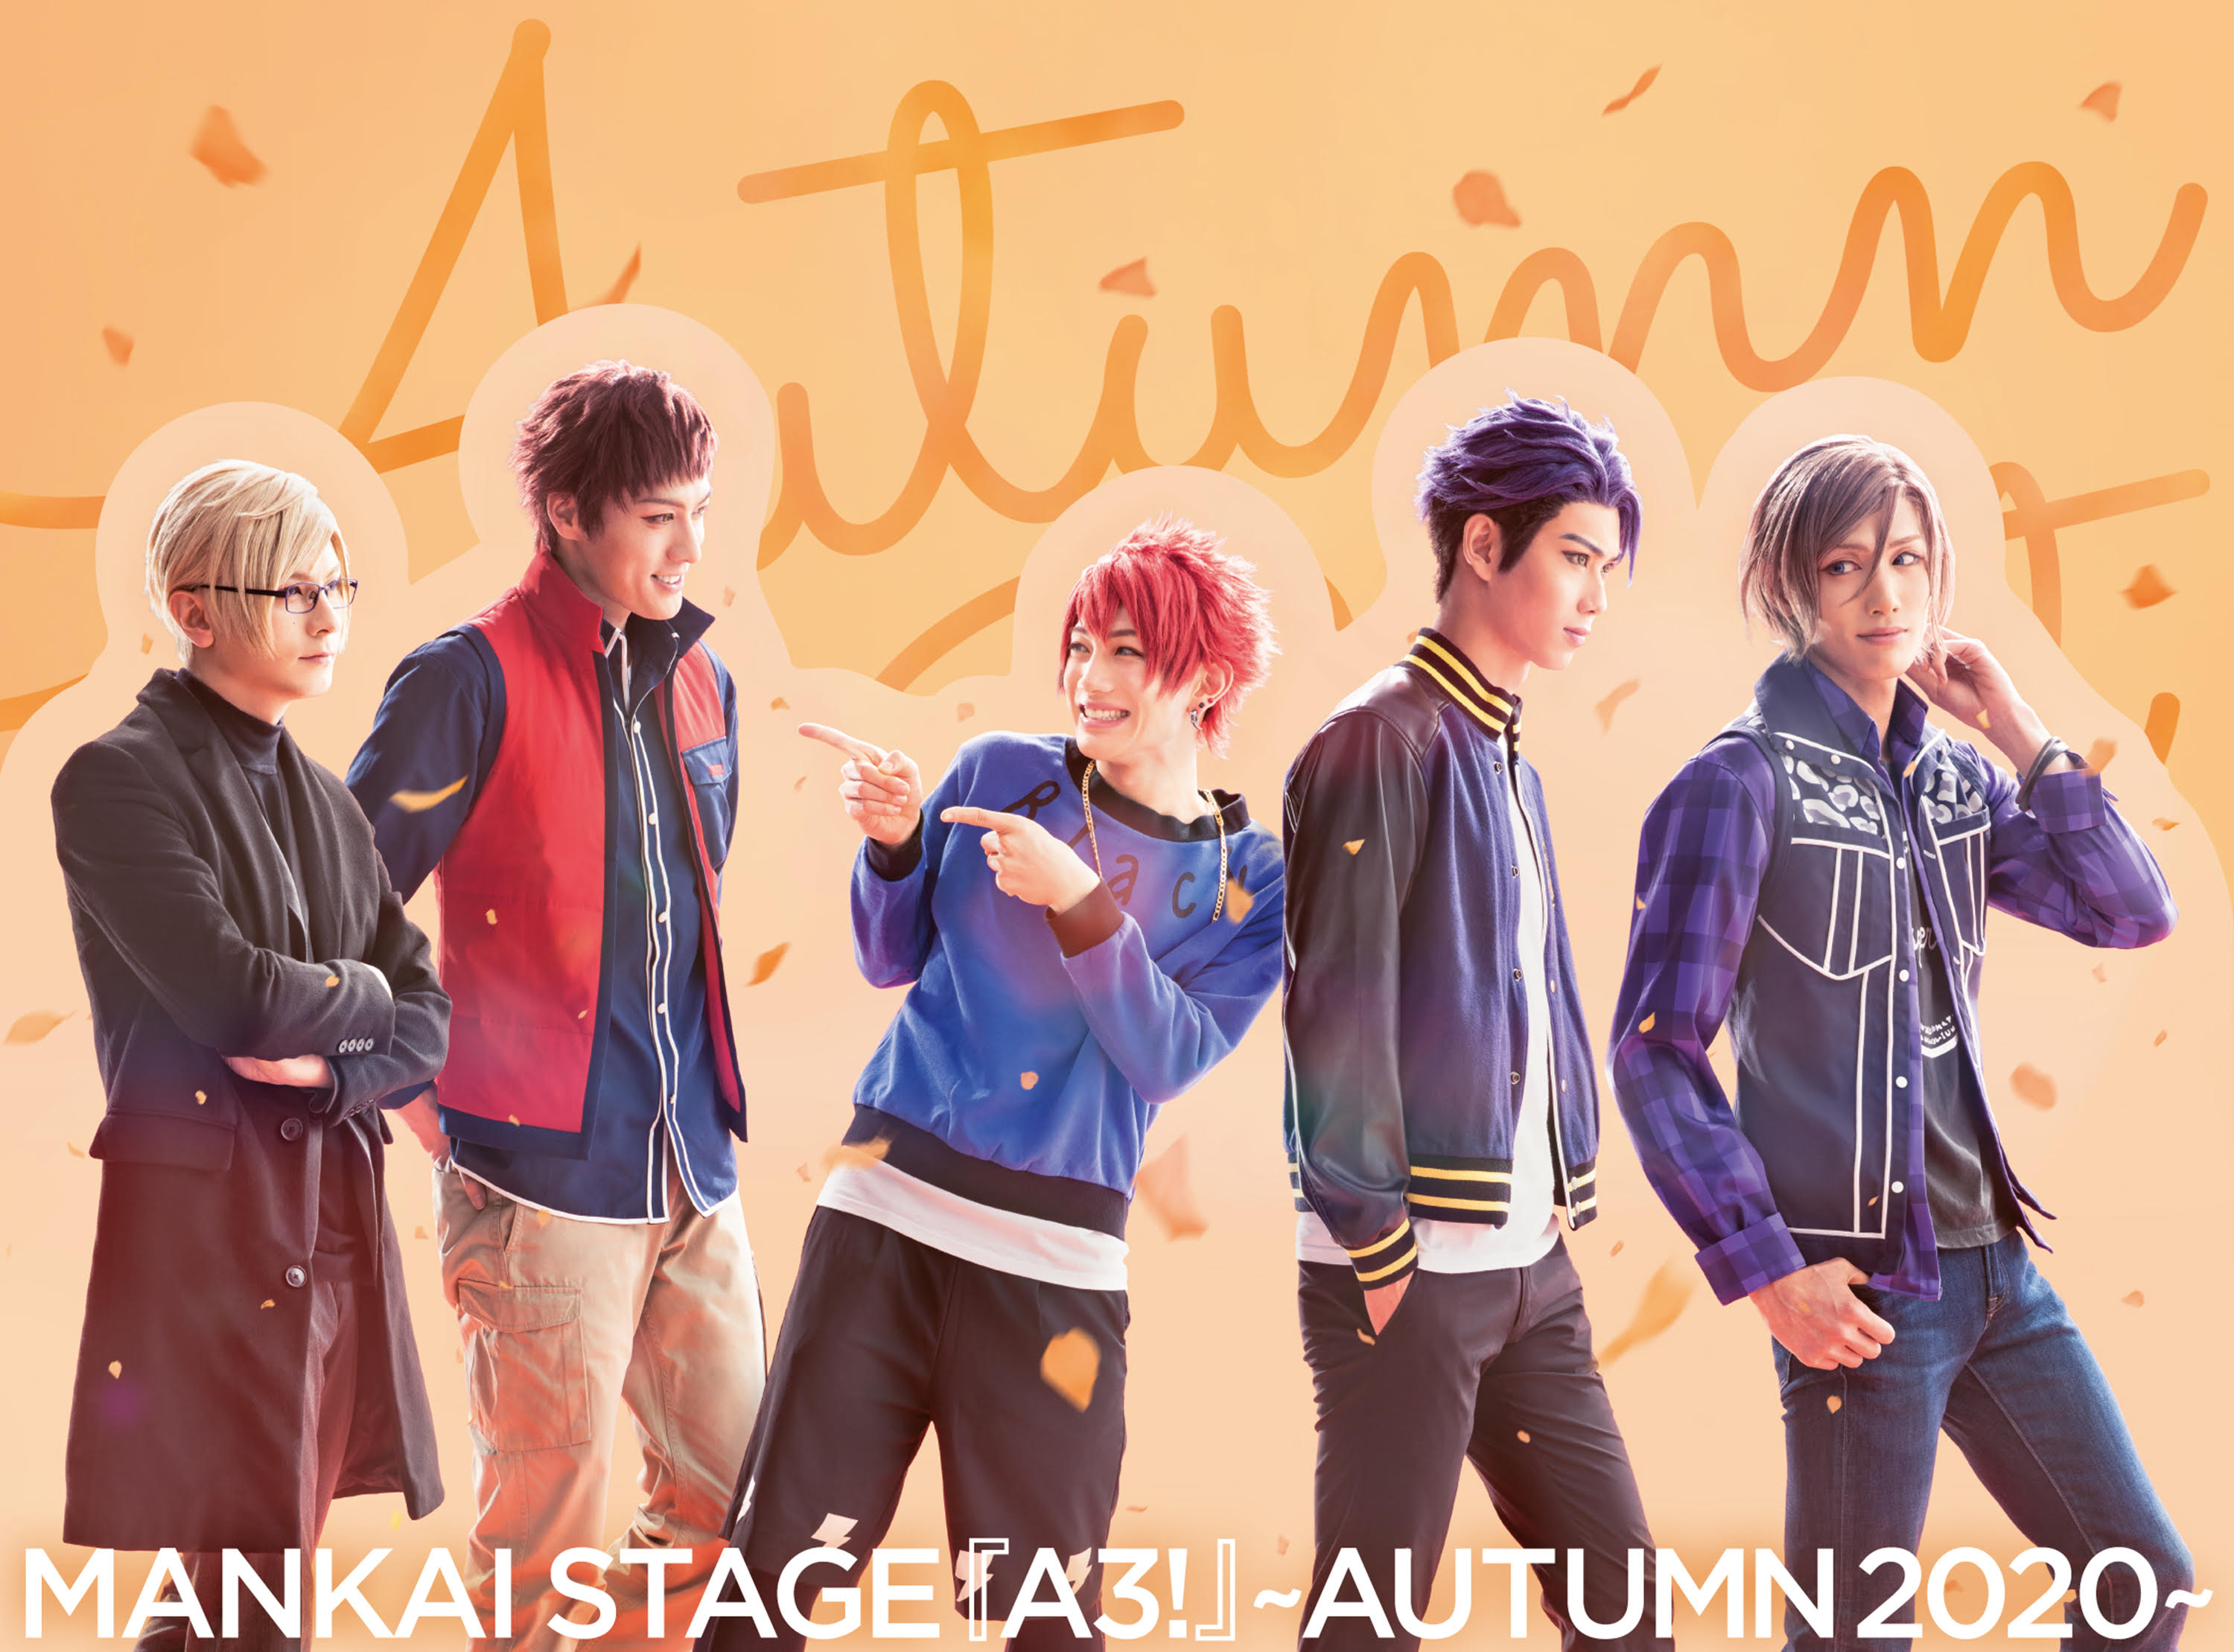 MANKAI STAGE『A3!』ACT2! ～WINTER 2023～ | きゃにめ